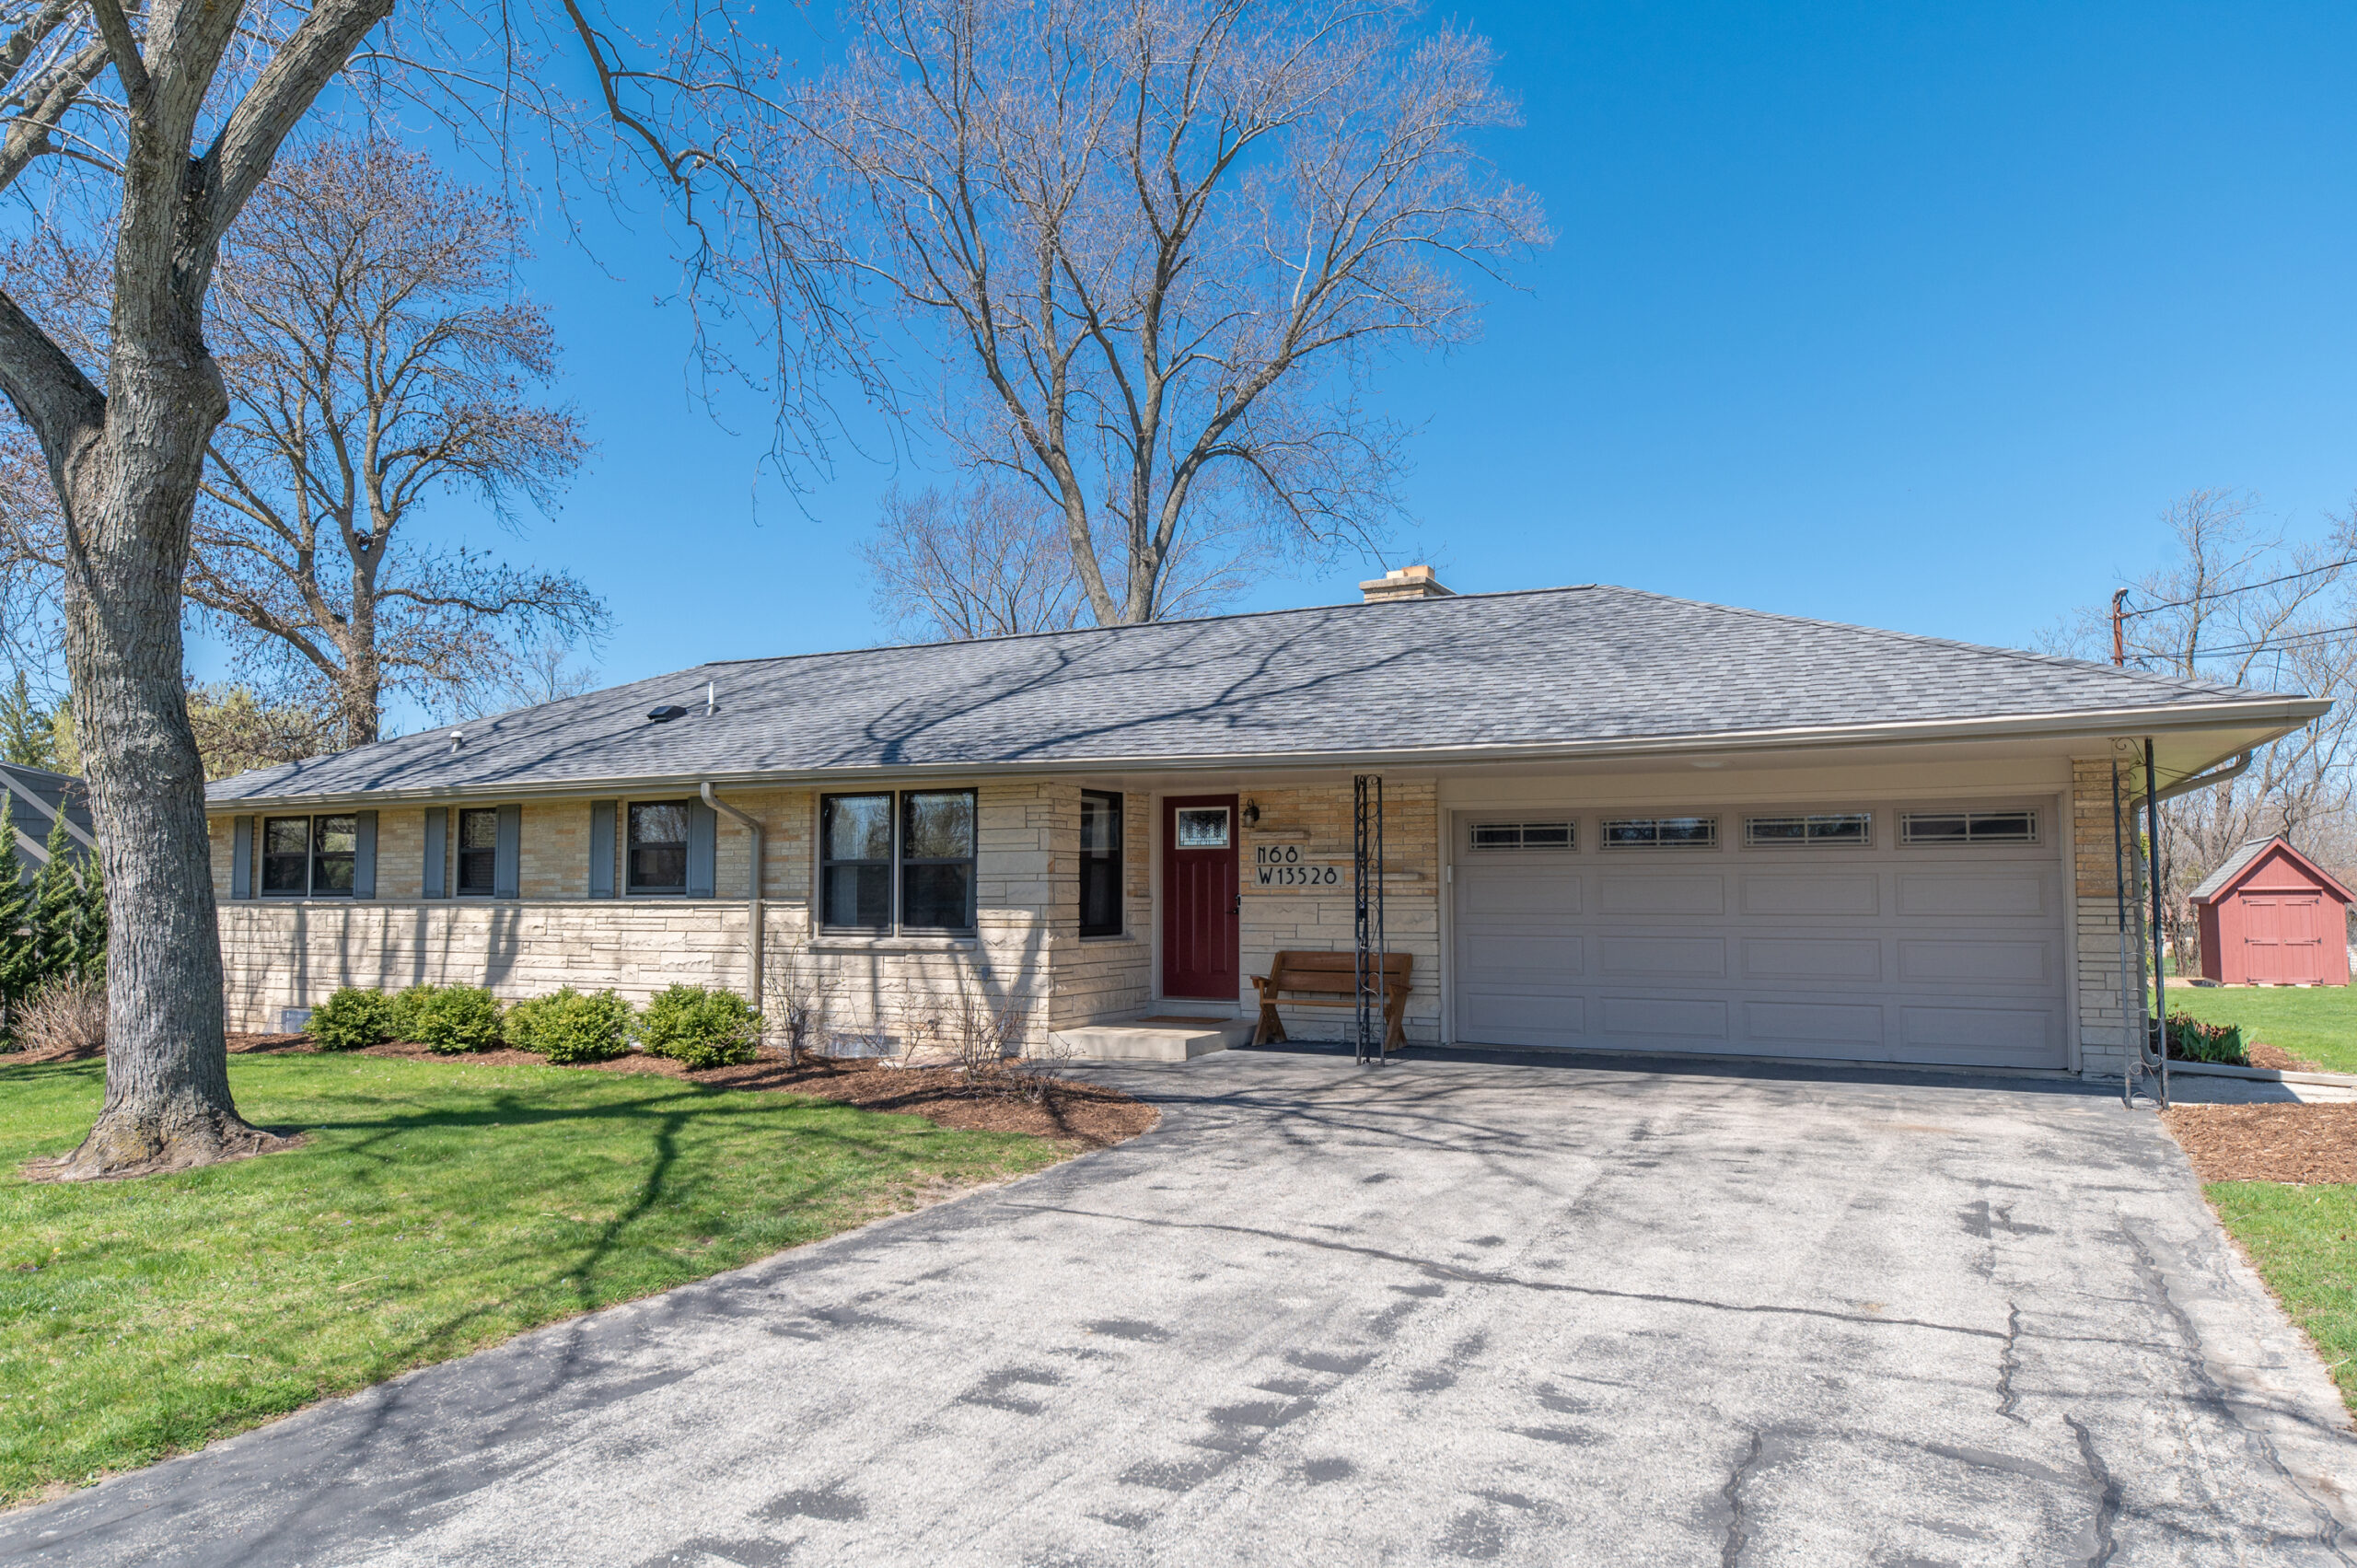  Home for Sale - 4754 N. 104th St. Wauwatosa, WI 53225-4508